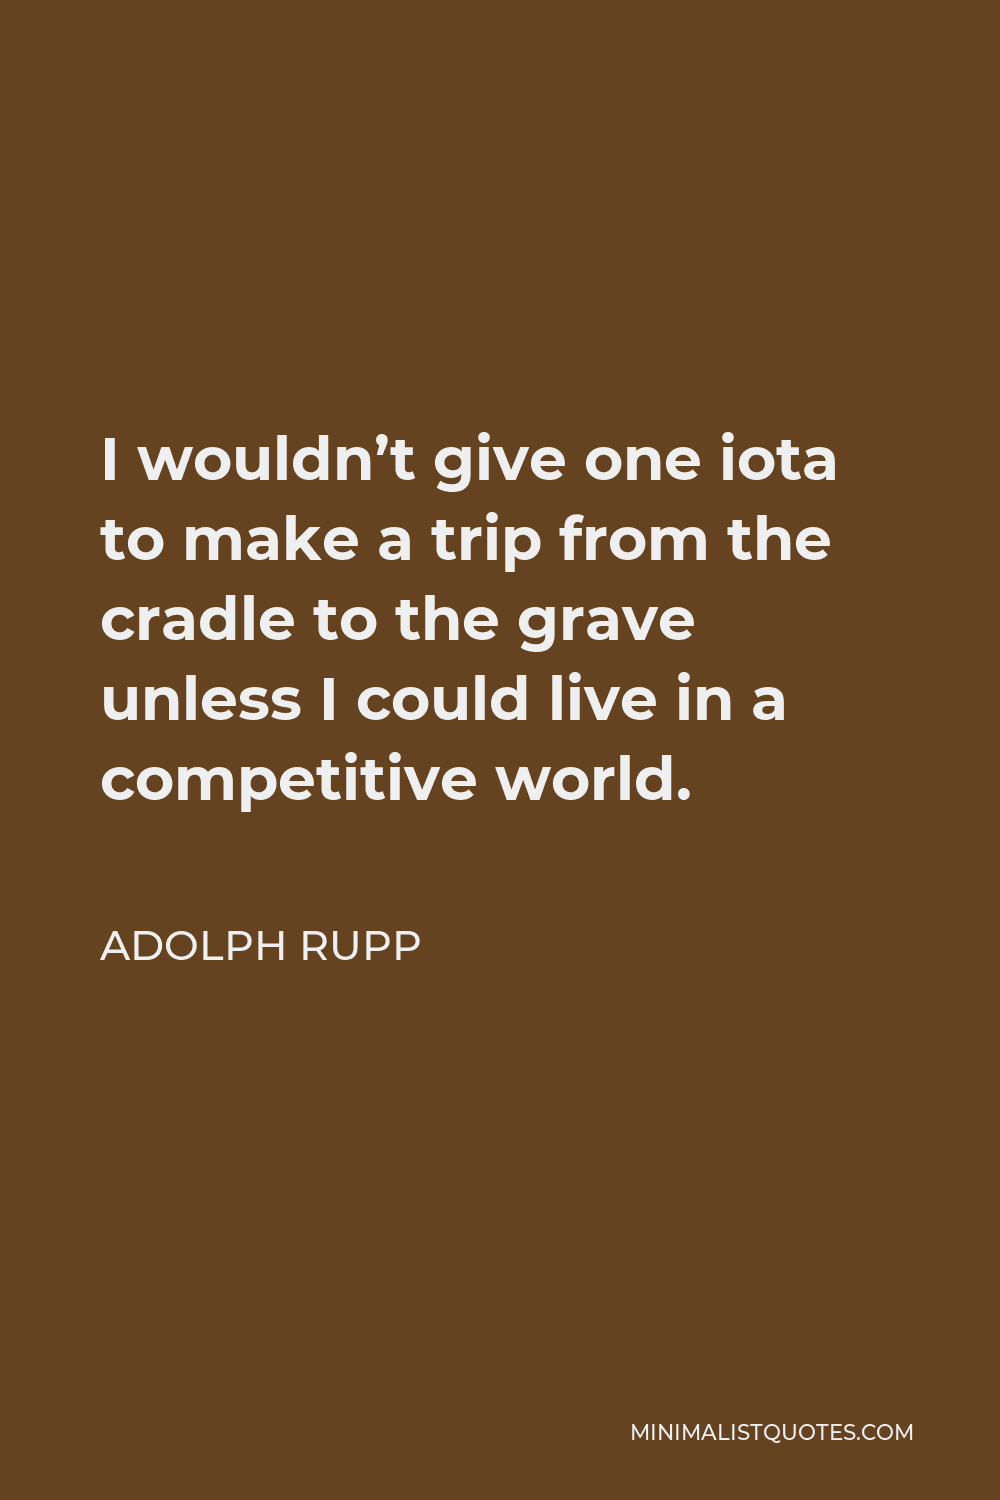 Adolph Rupp Quote - I wouldn’t give one iota to make a trip from the cradle to the grave unless I could live in a competitive world.